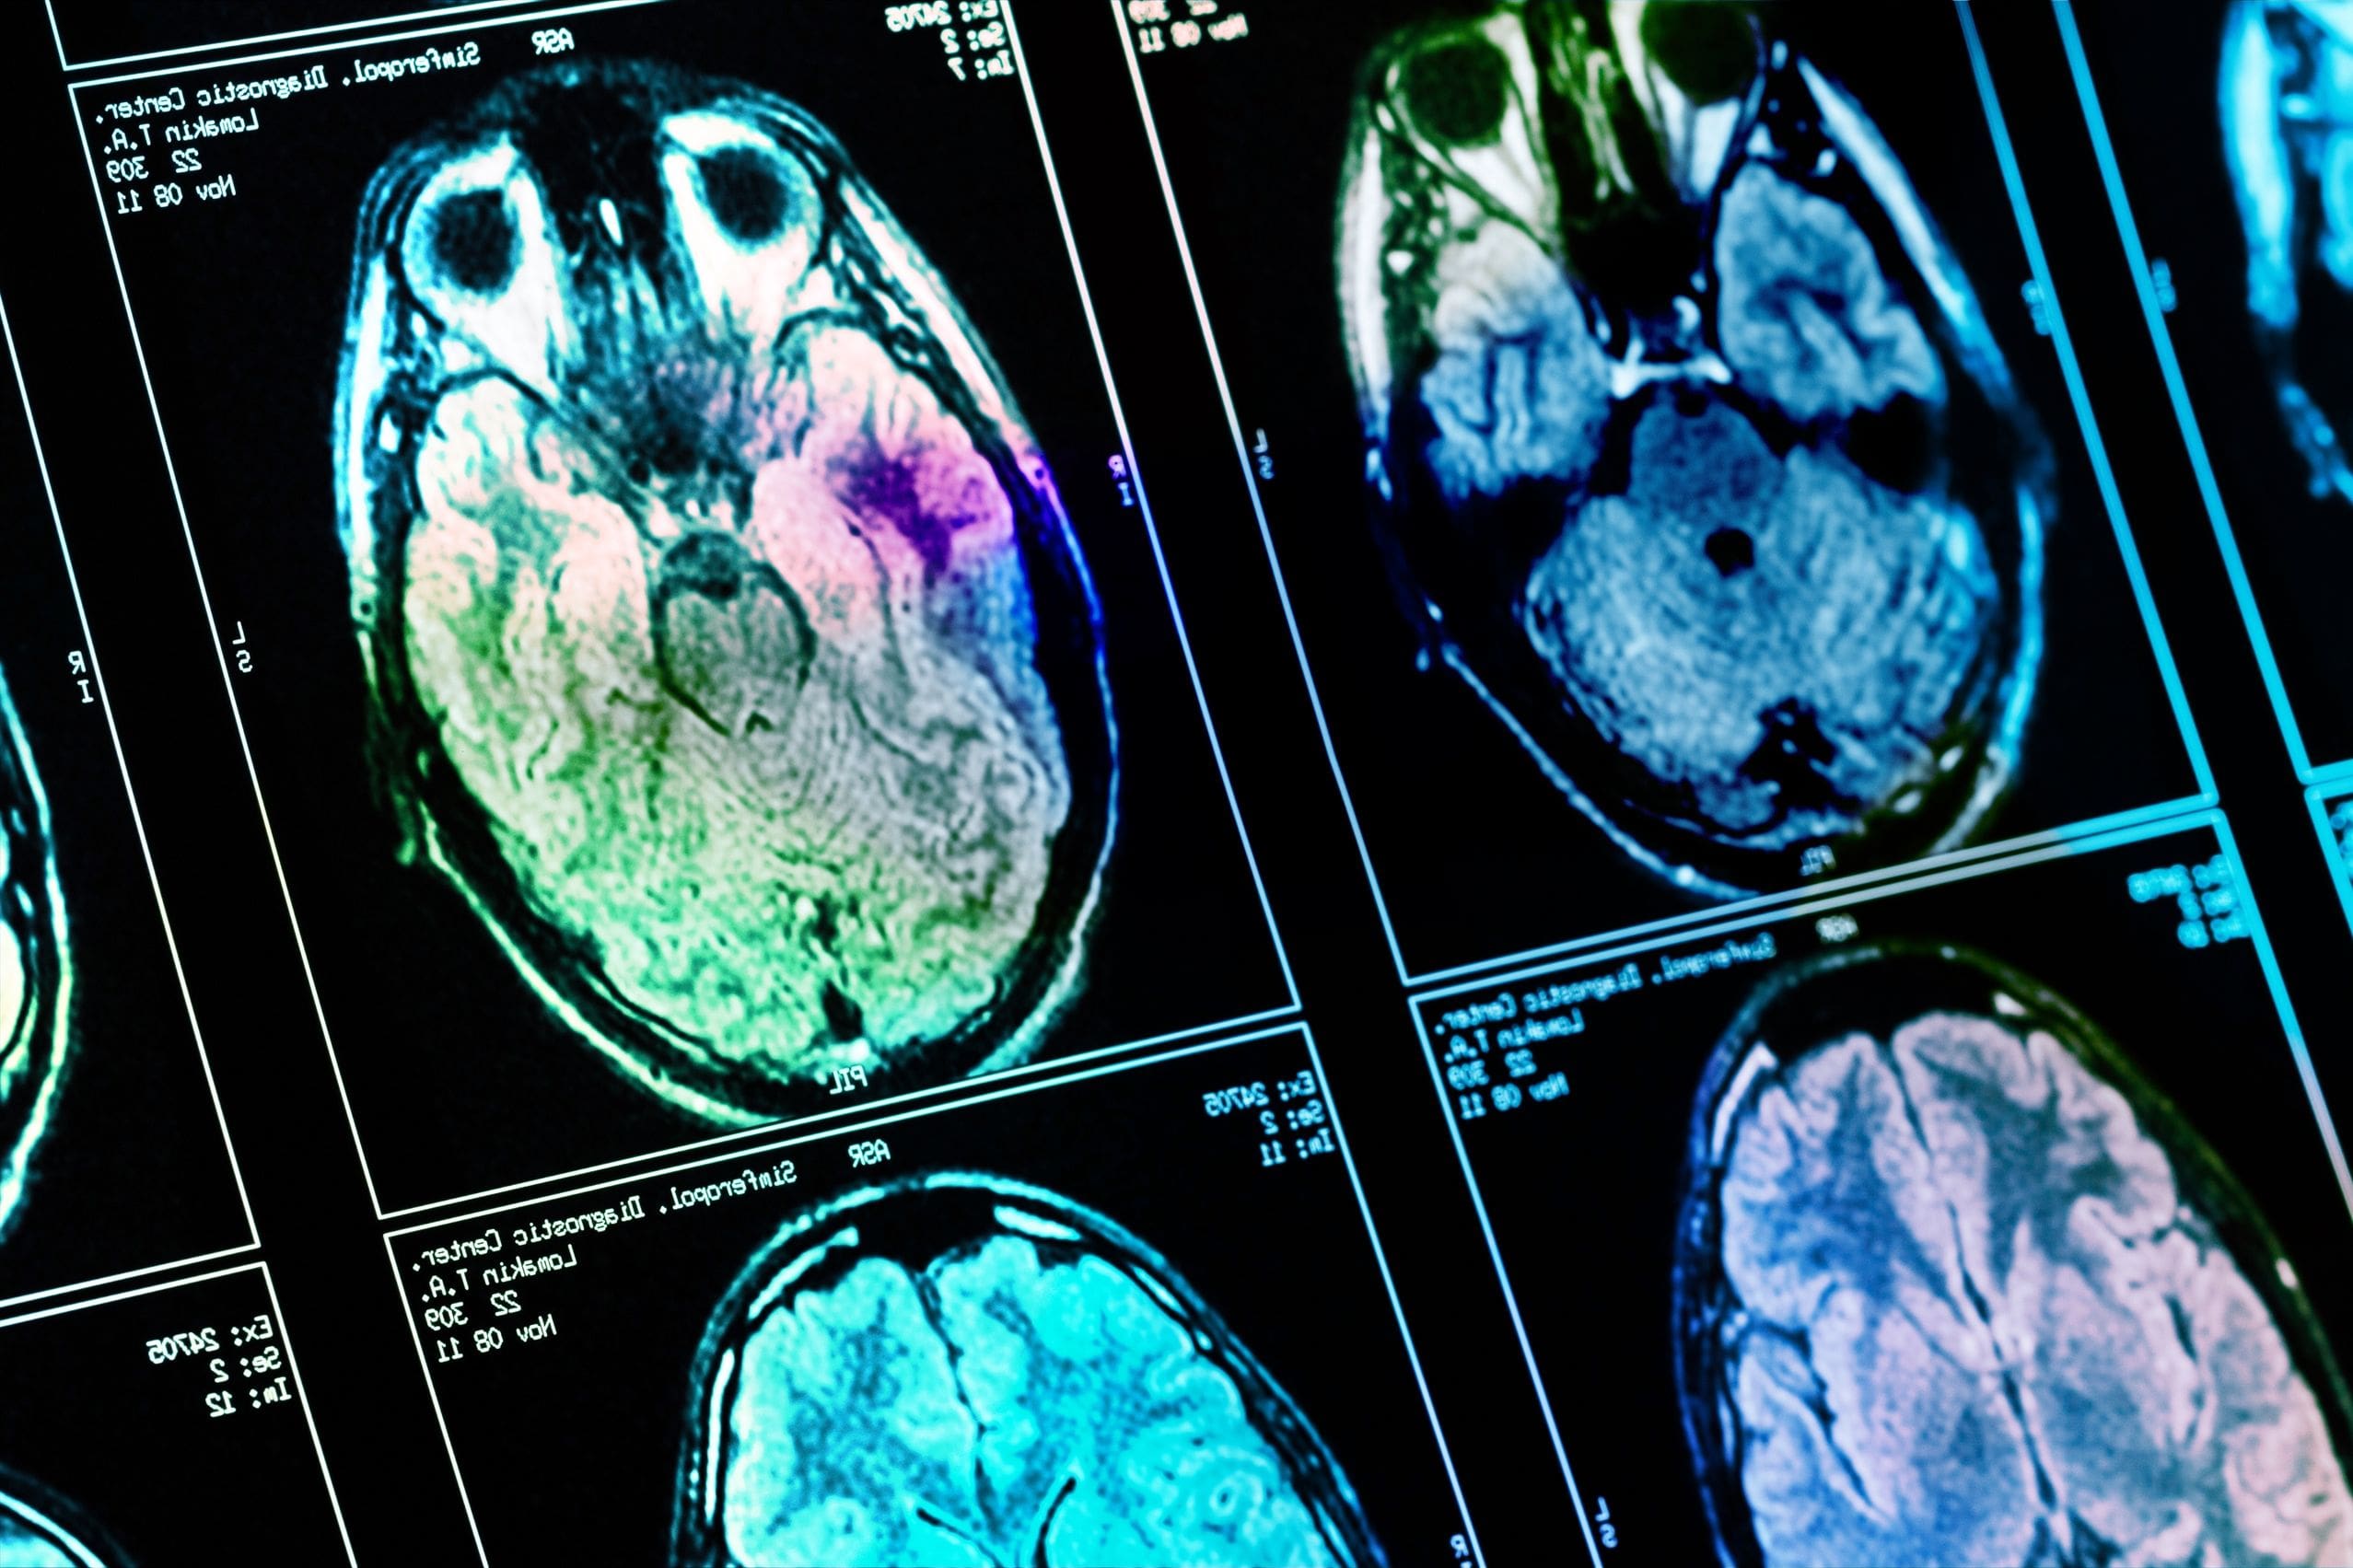 What causes brain cancer?